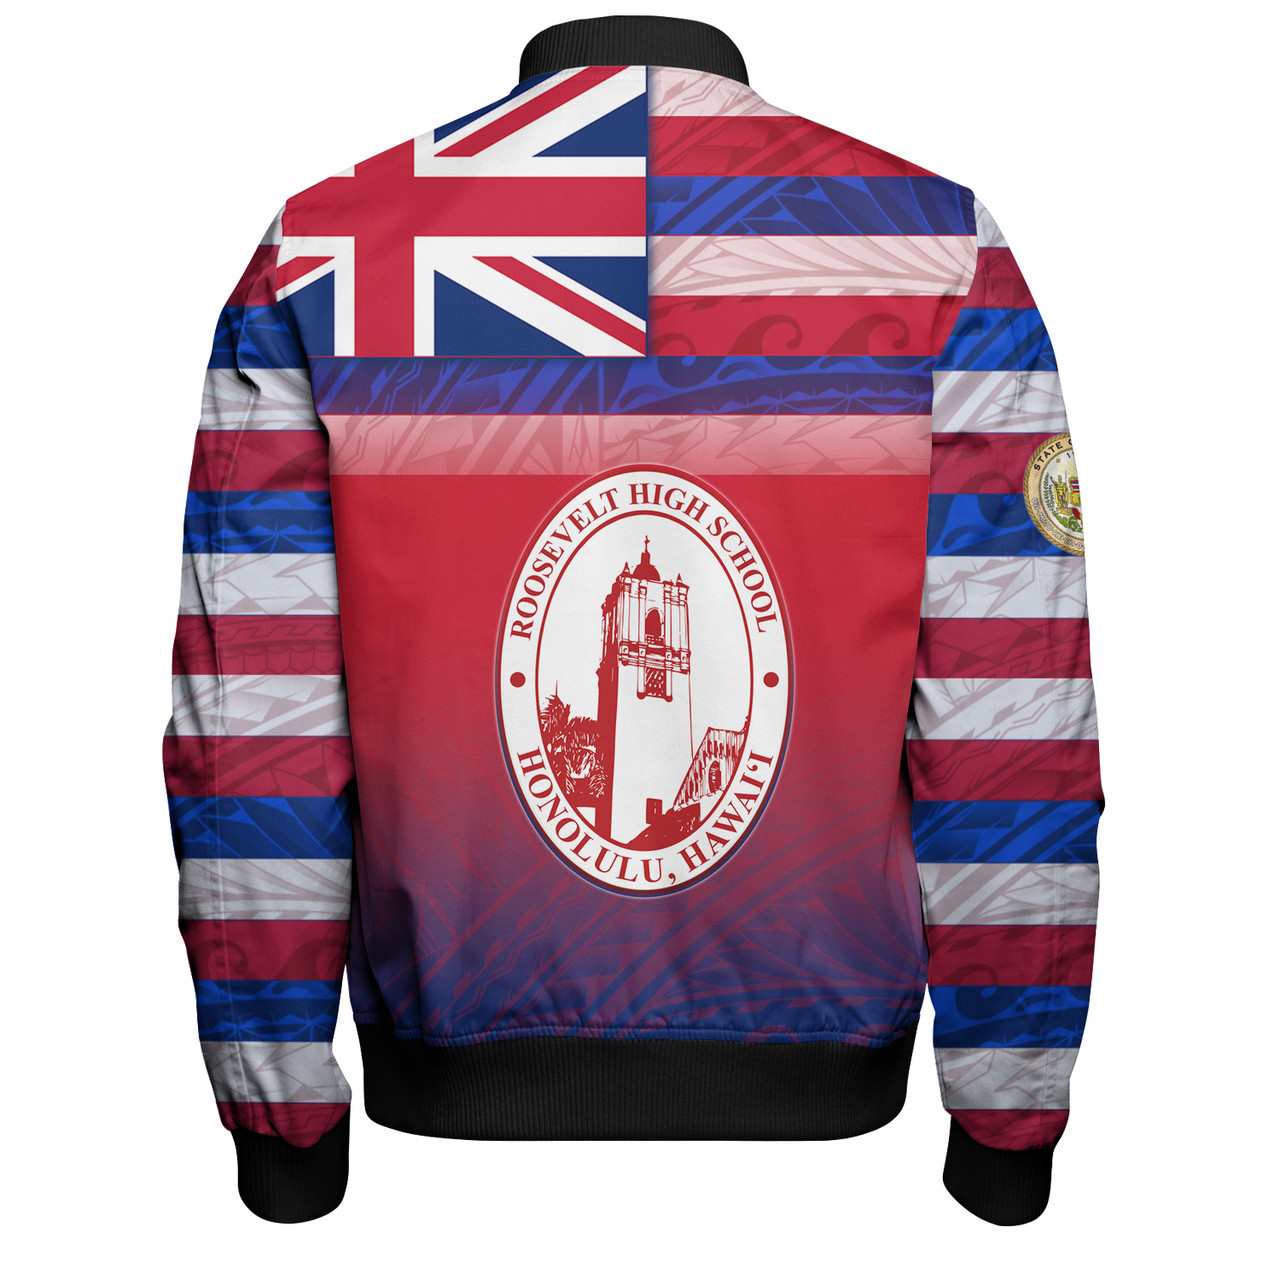 Hawaii President Theodore Roosevelt High School Bomber Jacket Flag Color With Traditional Patterns